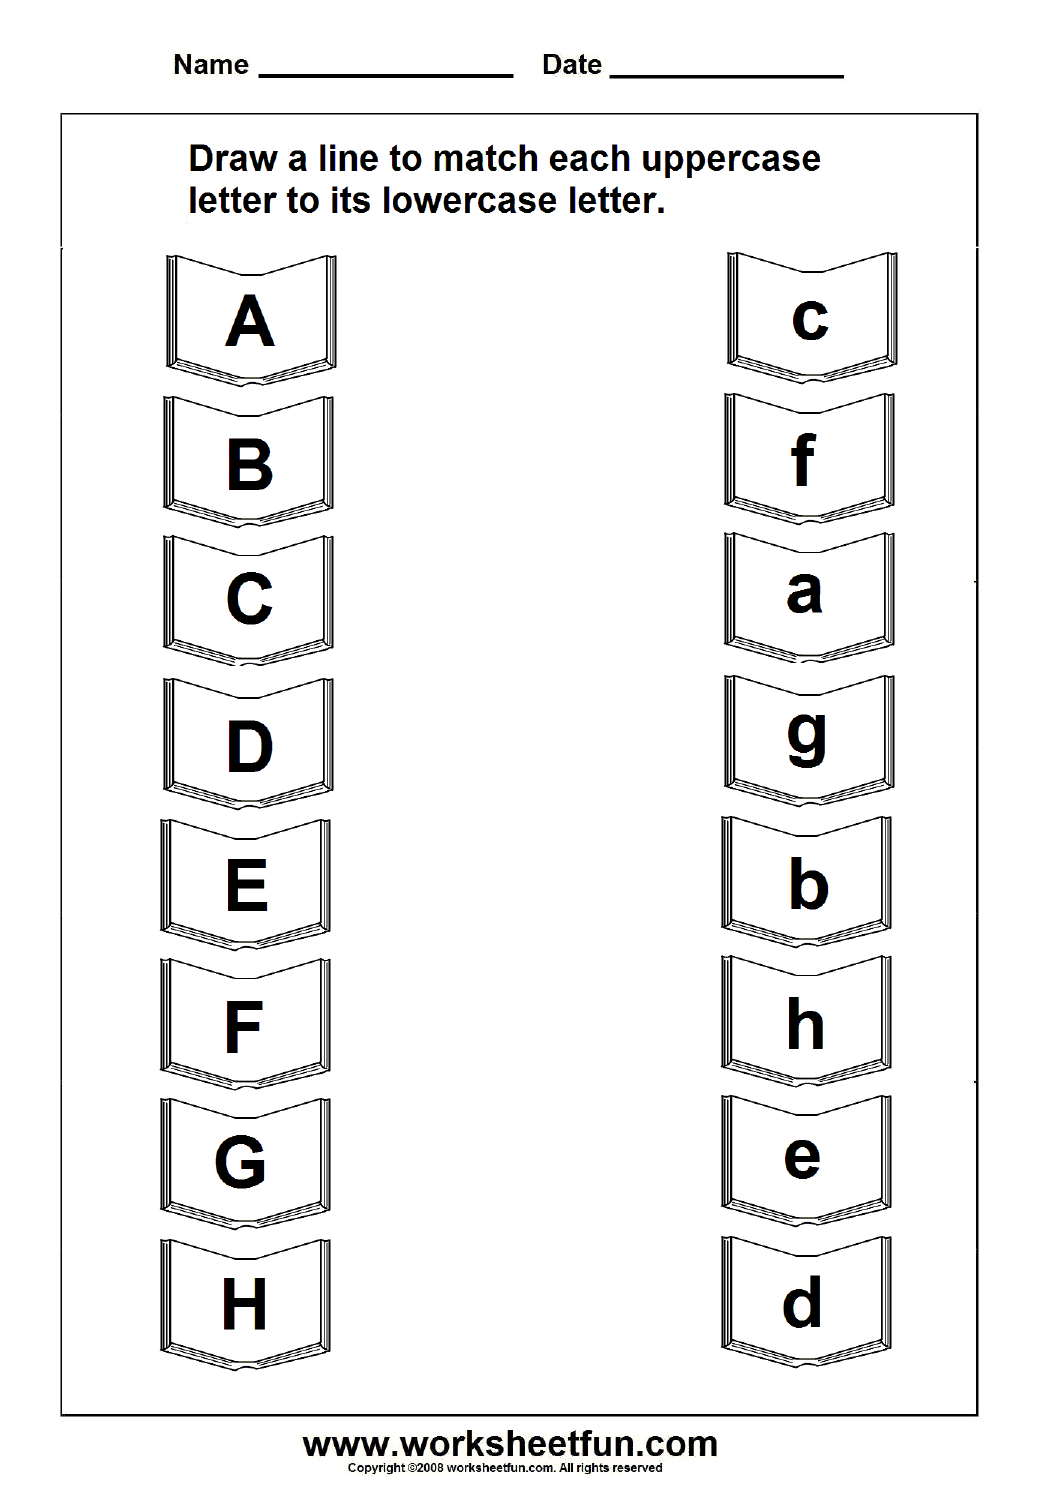 match-uppercase-and-lowercase-letters-11-worksheets-free-printable